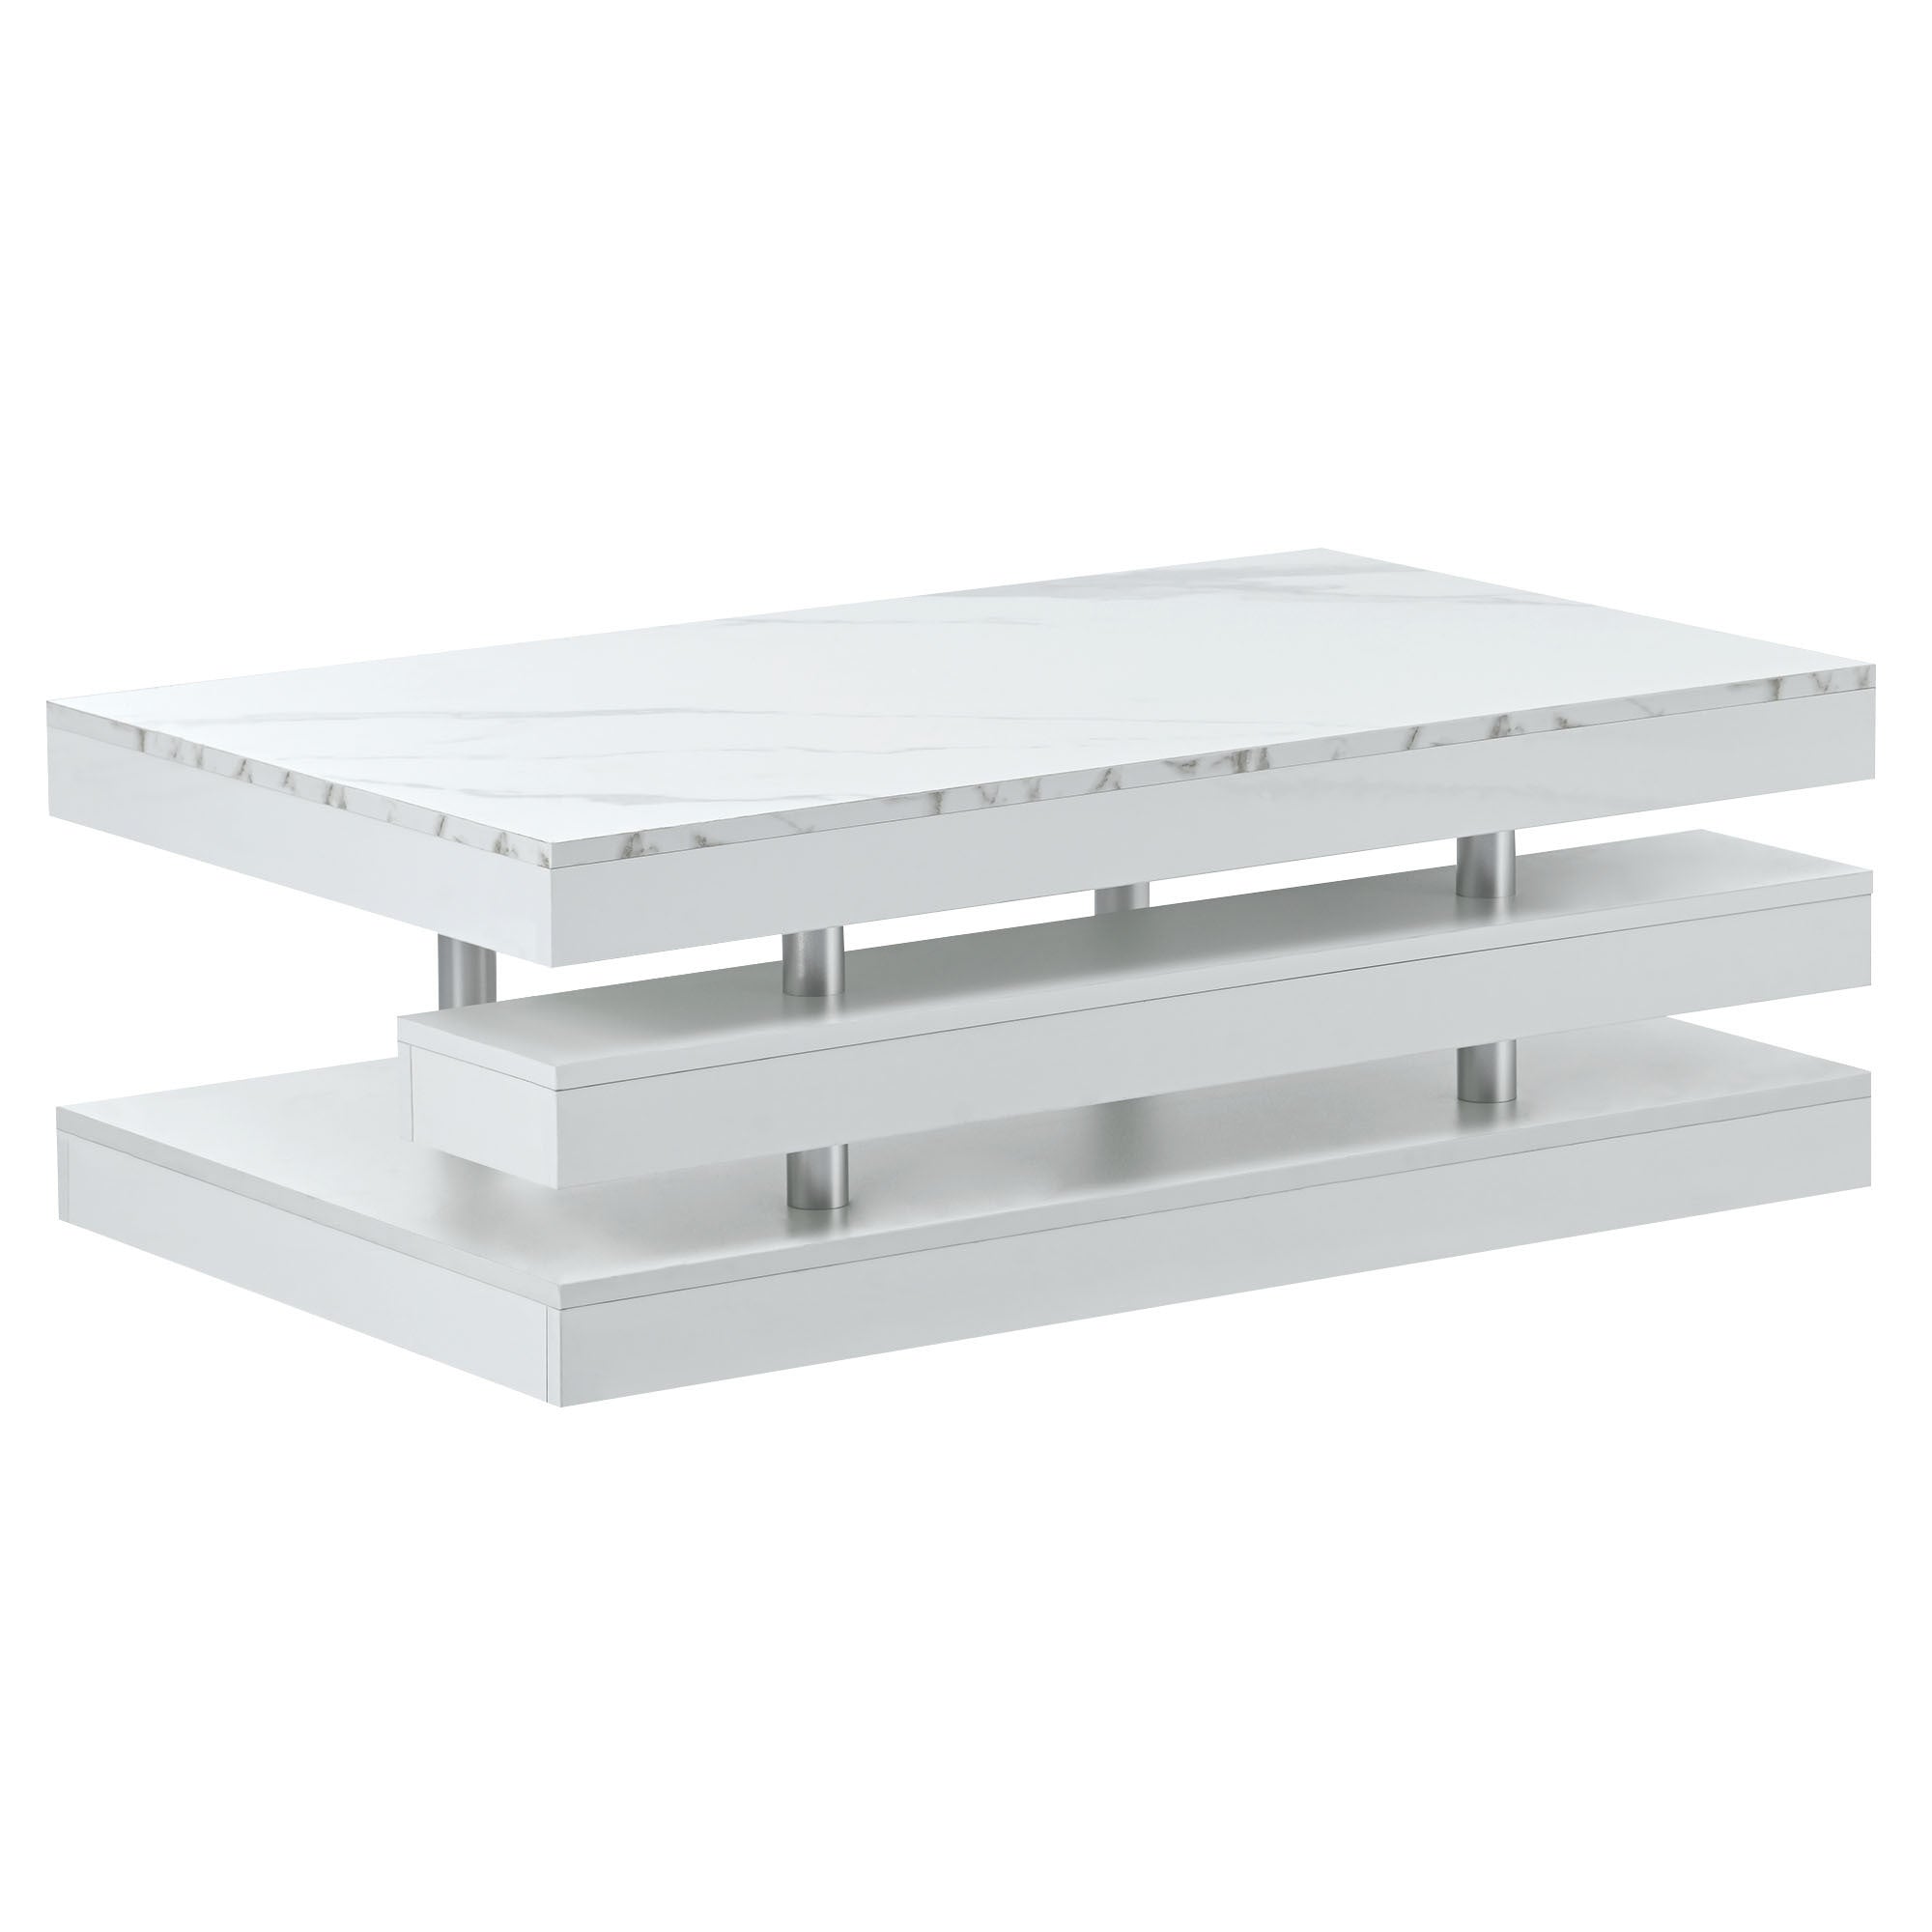 39.30"x23.60" Modern White Glossy Rectangle Coffee Table